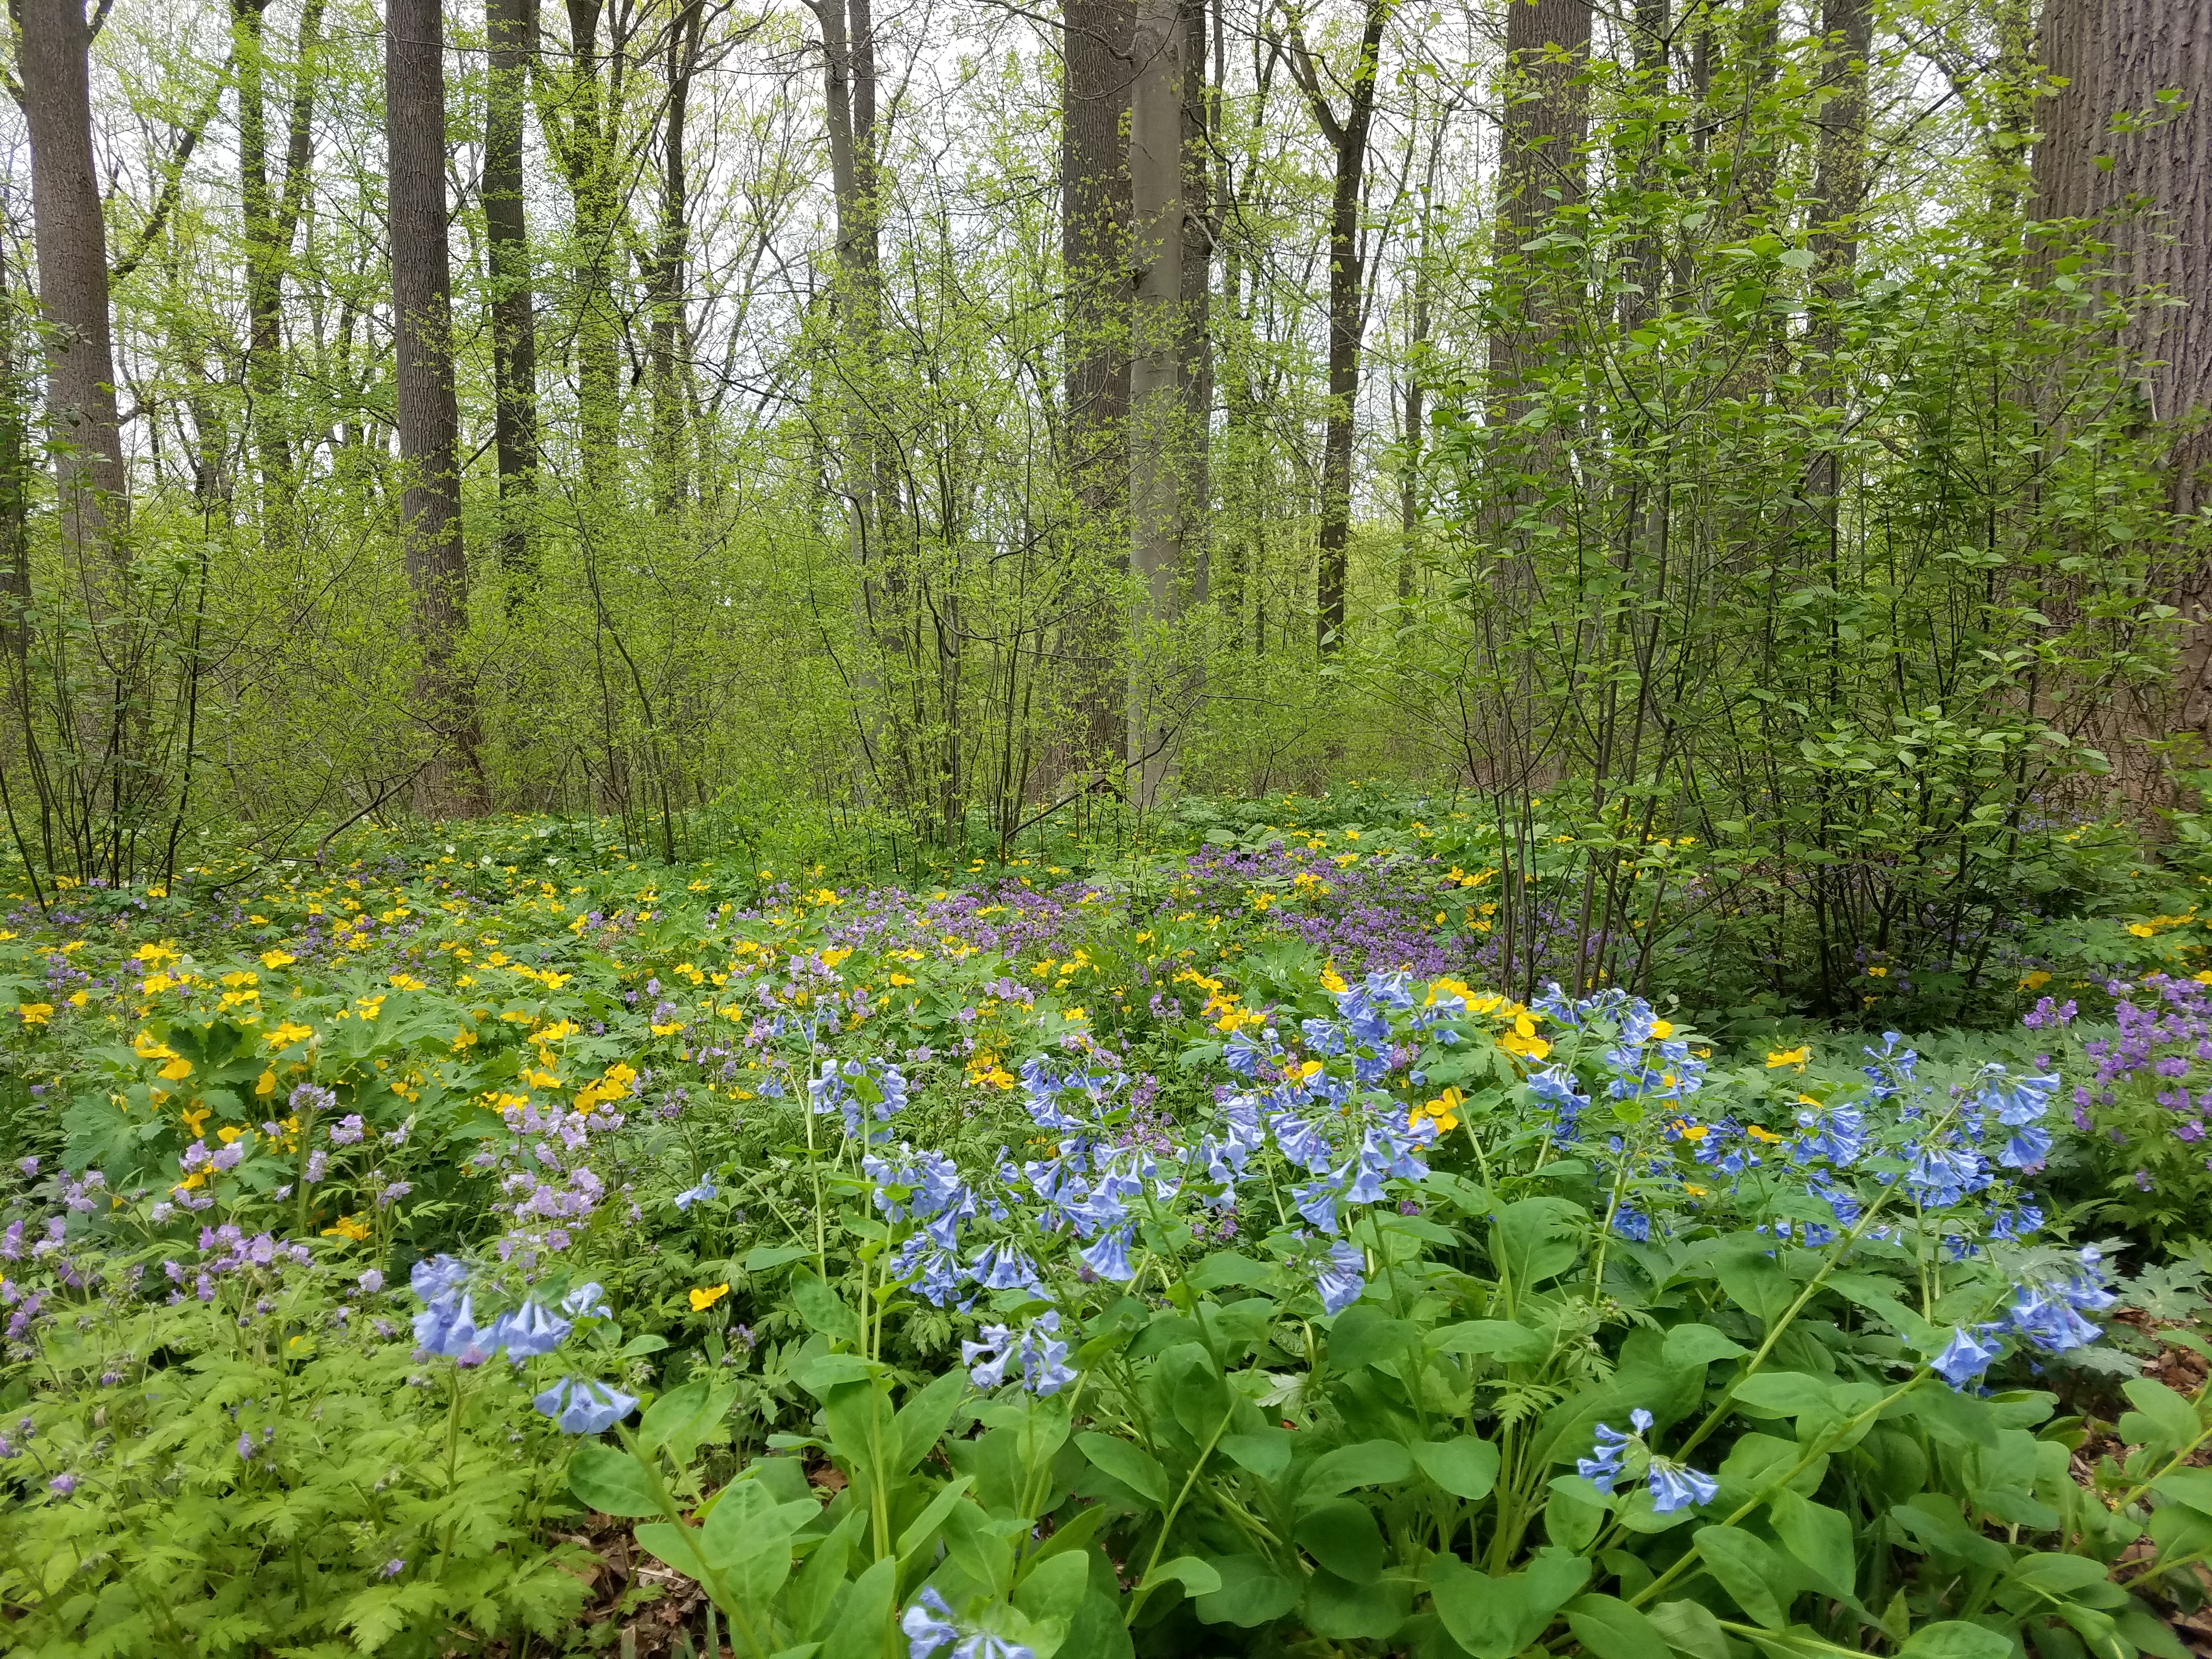 Spring wildflowers in blue, yellow, and purple bloom on the forest floor.